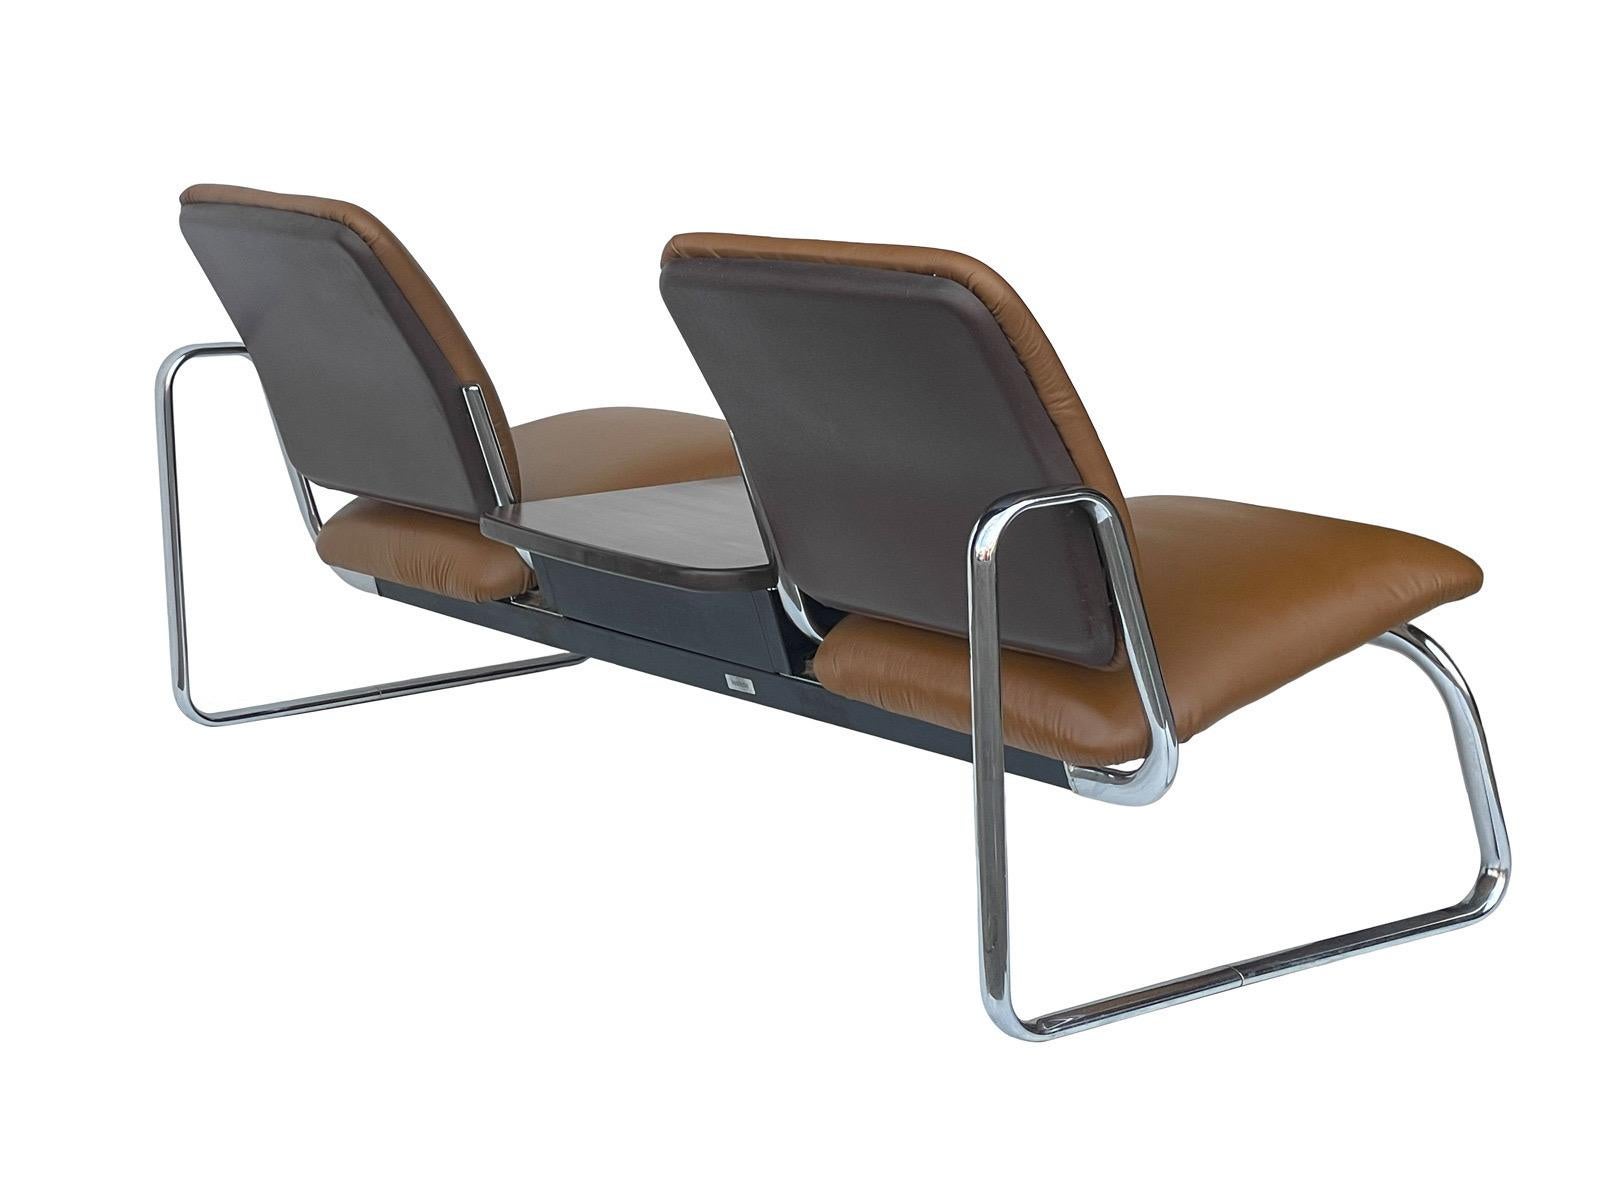 Super cool Steelcase bench reupholstered with authentic Herman Miller leather from DWR.